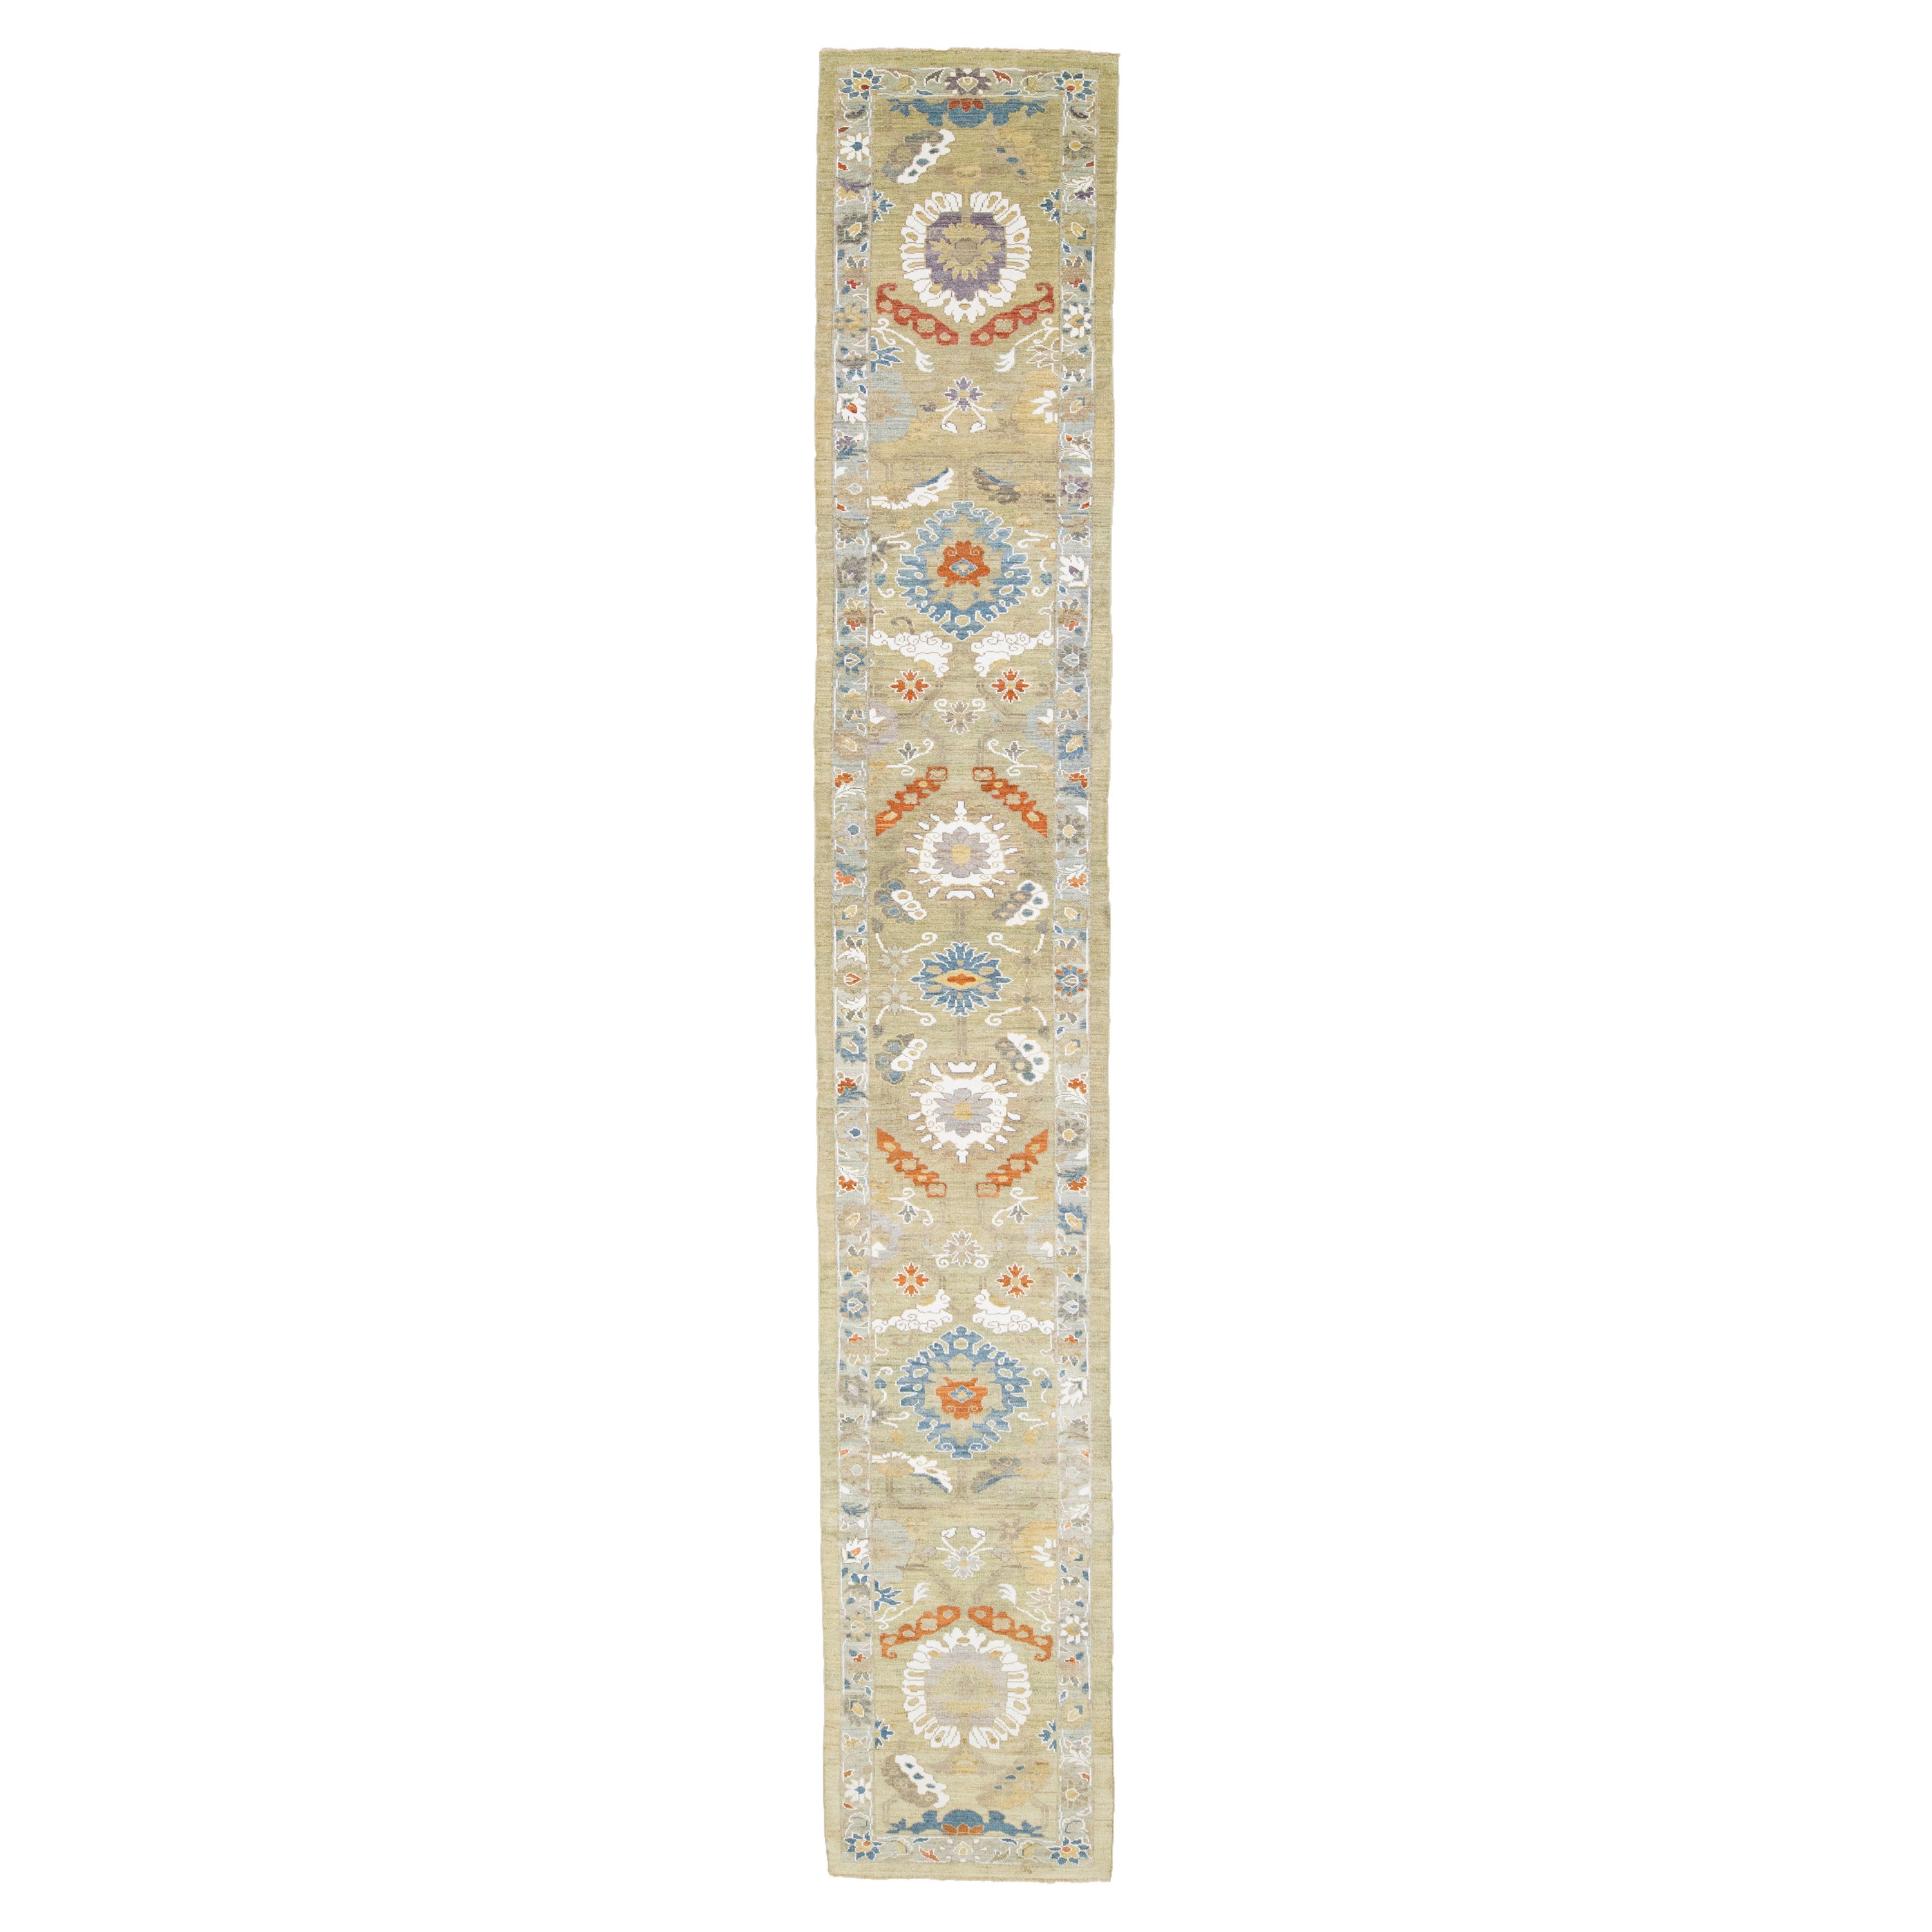 Contemporary Mahal Handmade Beige Wool Runner With Floral Design For Sale